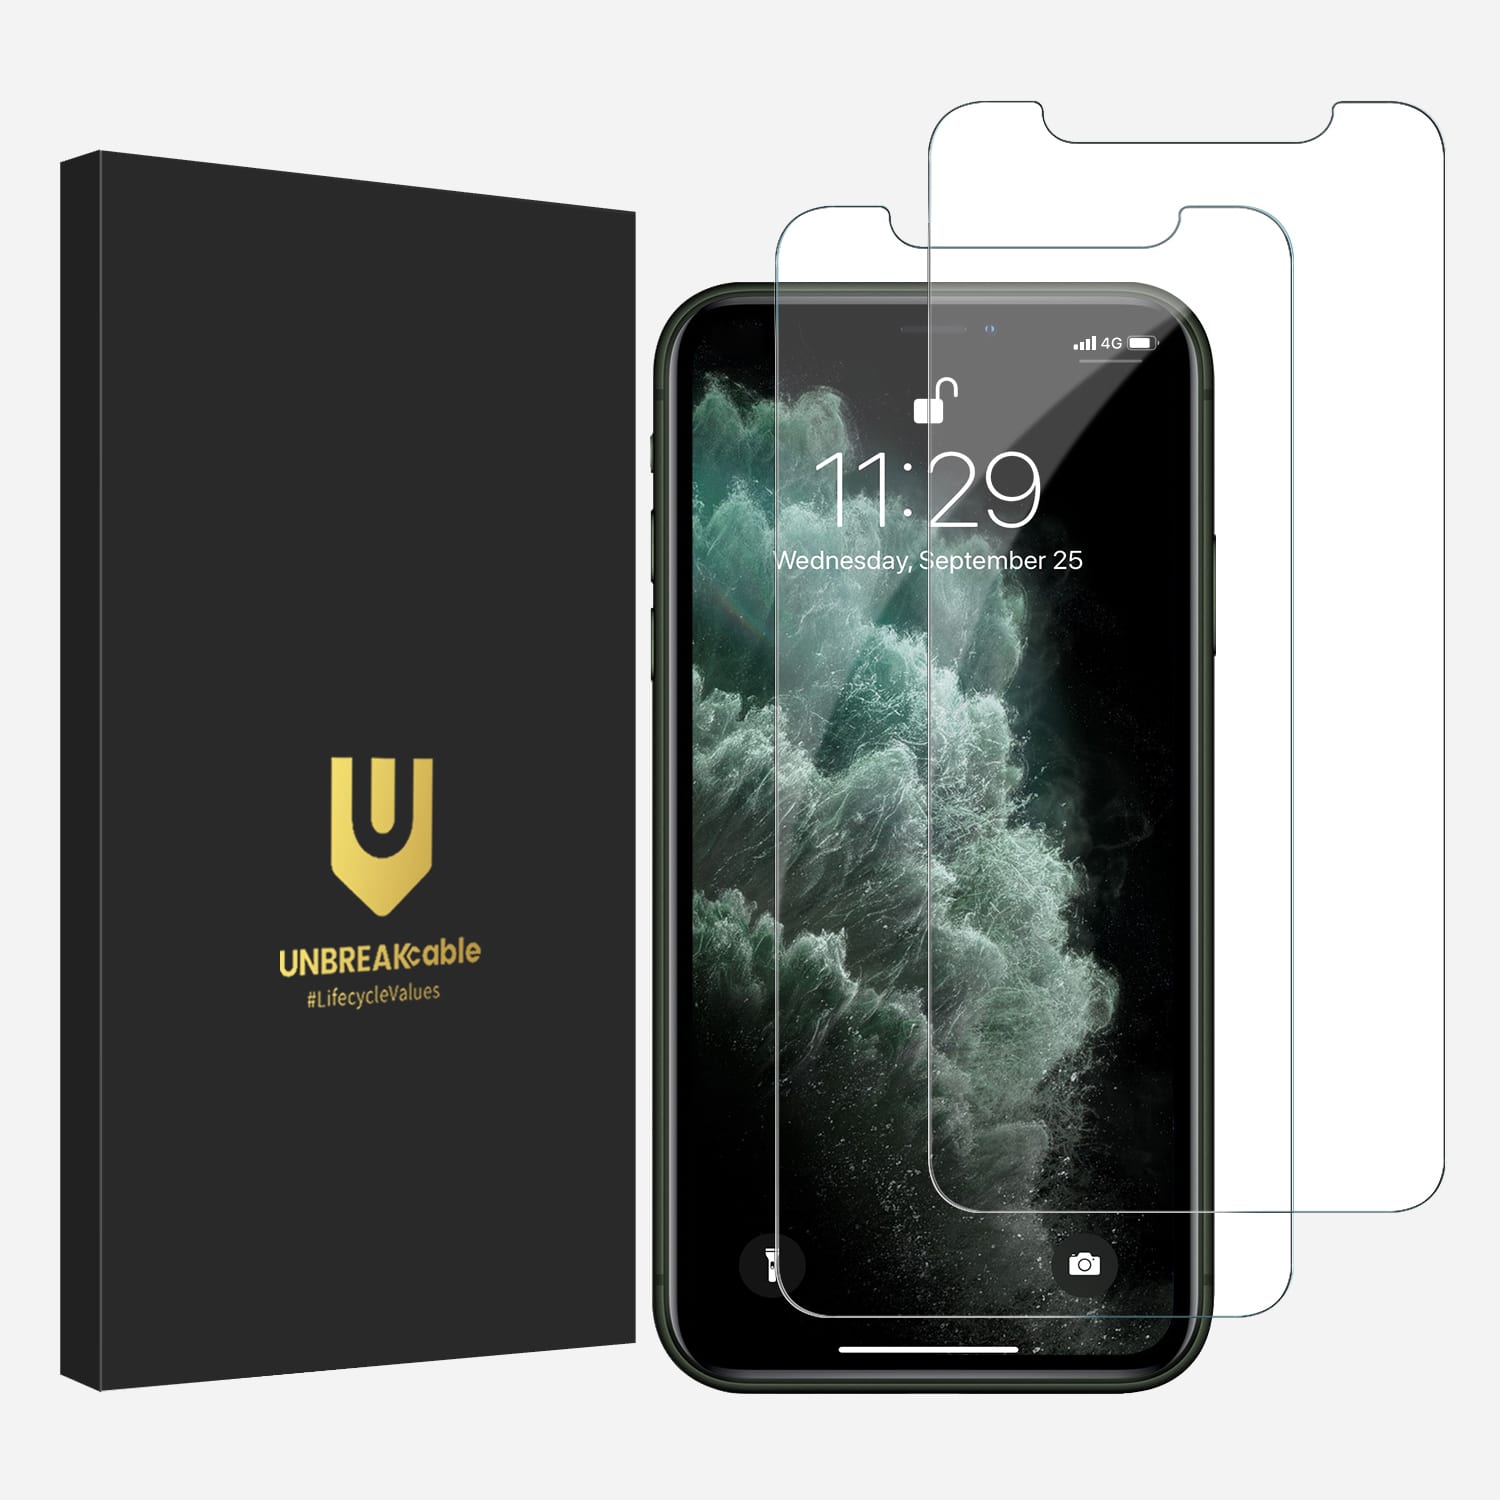 UNBREAKcable screen protector with package box